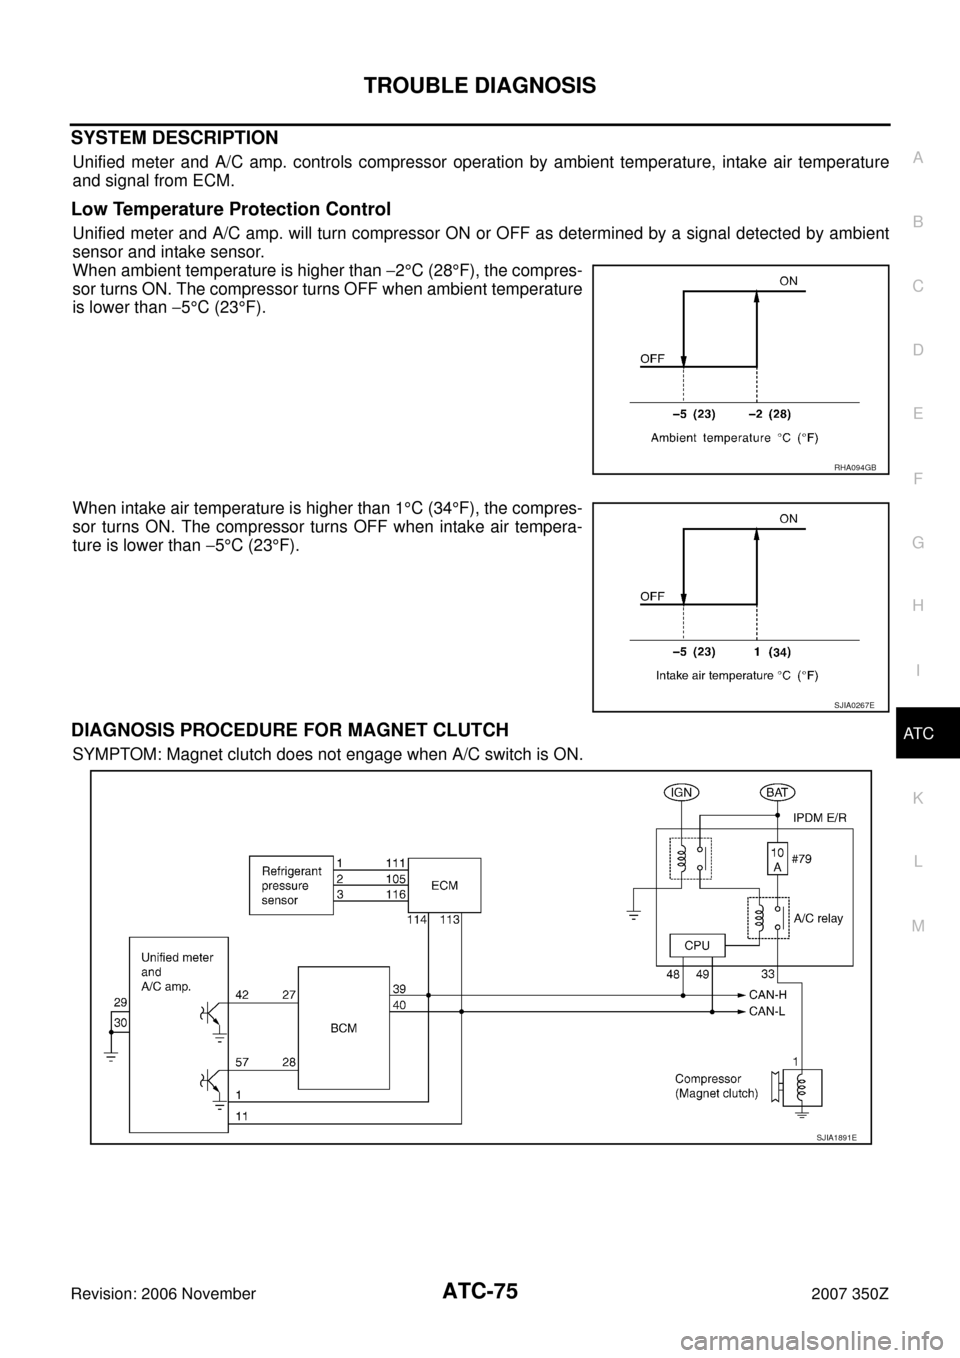 NISSAN 350Z 2007 Z33 Automatic Air Conditioner Manual PDF TROUBLE DIAGNOSIS
ATC-75
C
D
E
F
G
H
I
K
L
MA
B
AT C
Revision: 2006 November2007 350Z
SYSTEM DESCRIPTION
Unified meter and A/C amp. controls compressor operation by ambient temperature, intake air tem